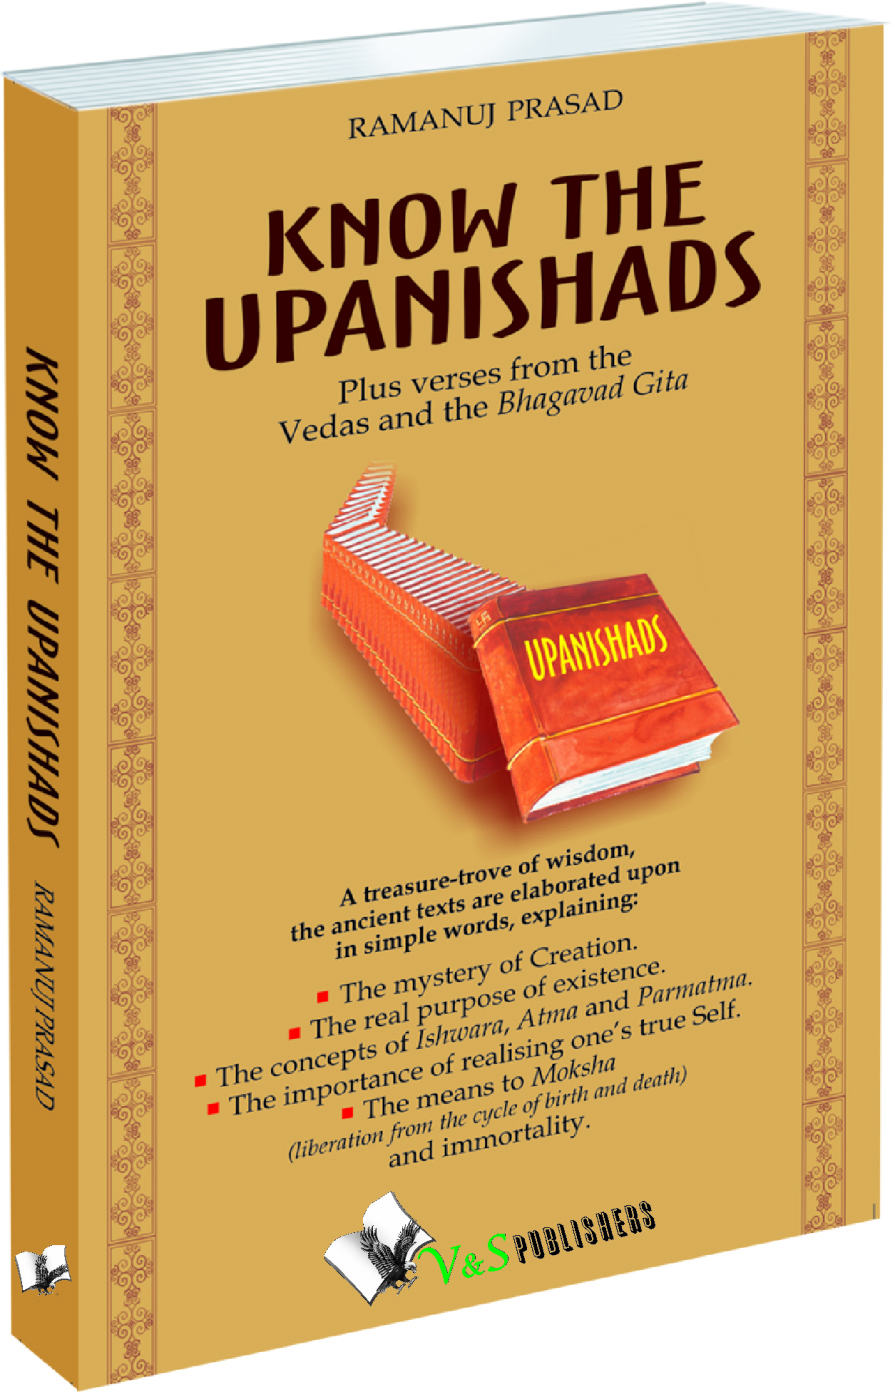 Know The Upanishads-Life as seen through the Upnishad